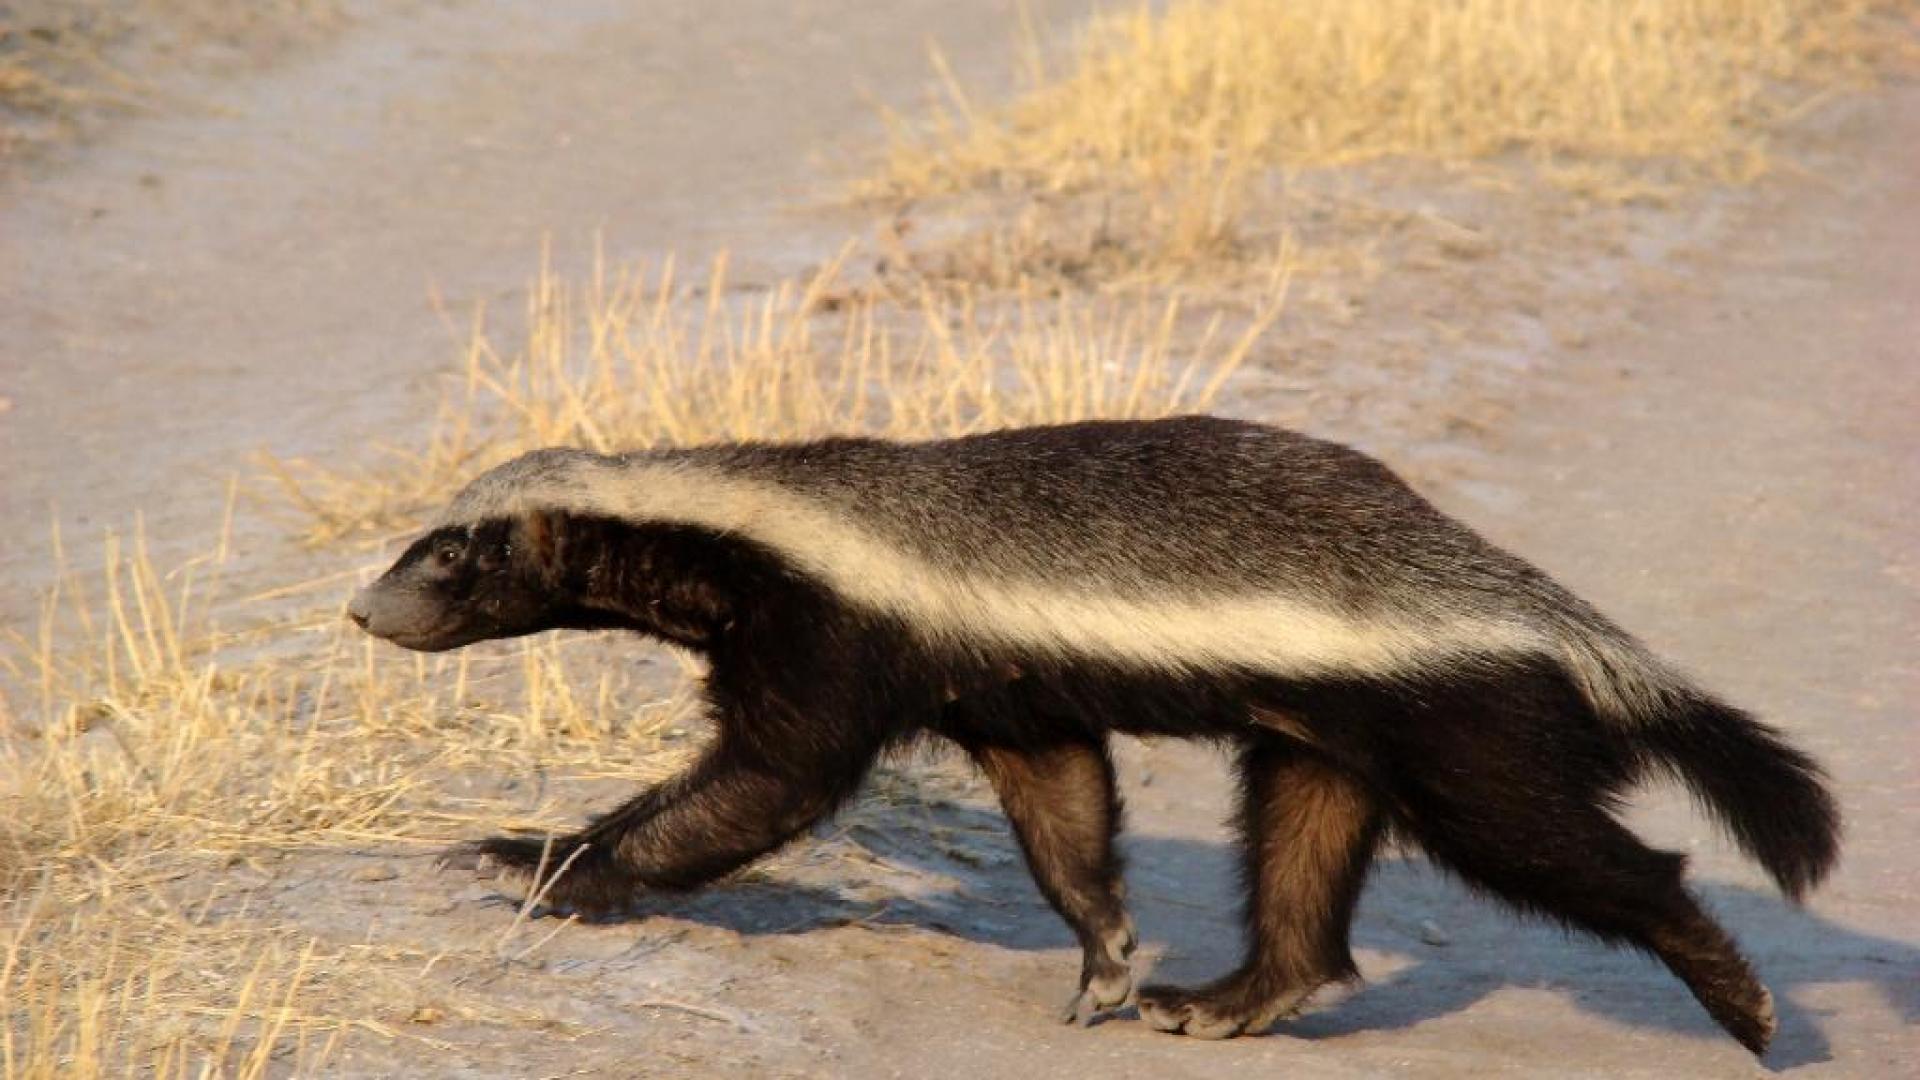 Small Black And Brown Striped Badger Standing In A Sand Background  Pictures Of A Honey Badger Background Image And Wallpaper for Free Download